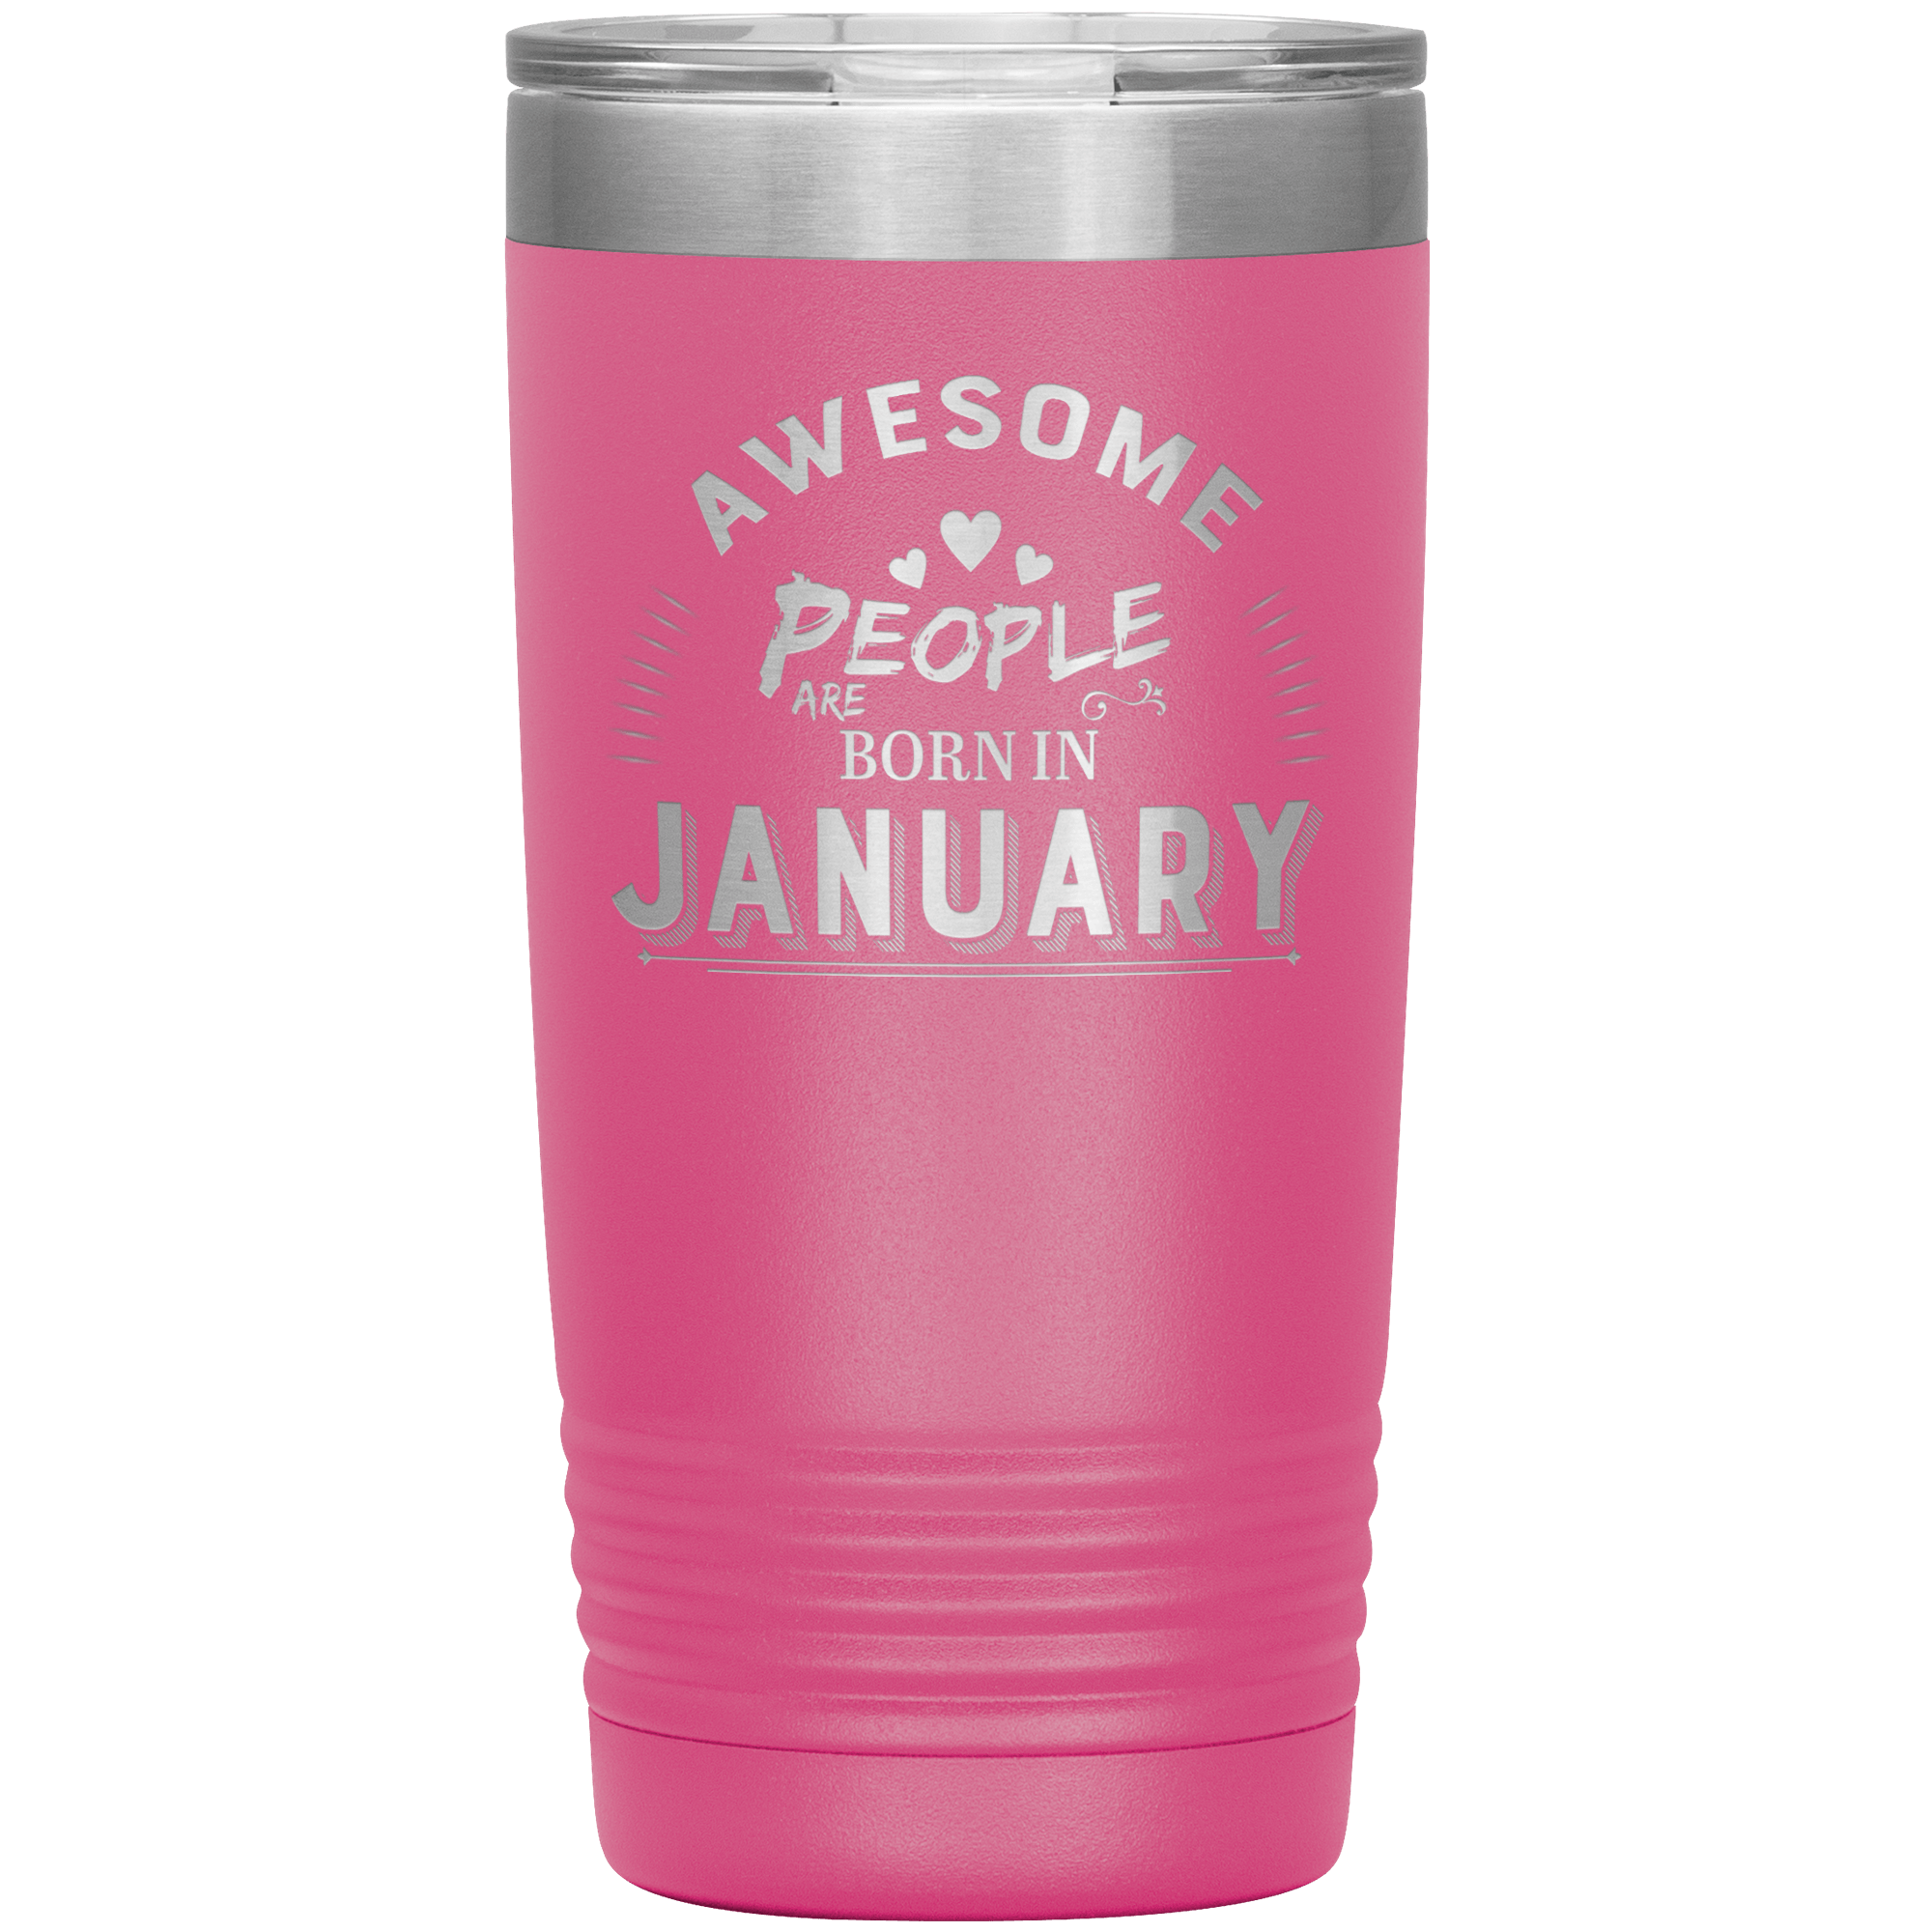 "AWESOME PEOPLE ARE BORN IN JANUARY" Tumbler